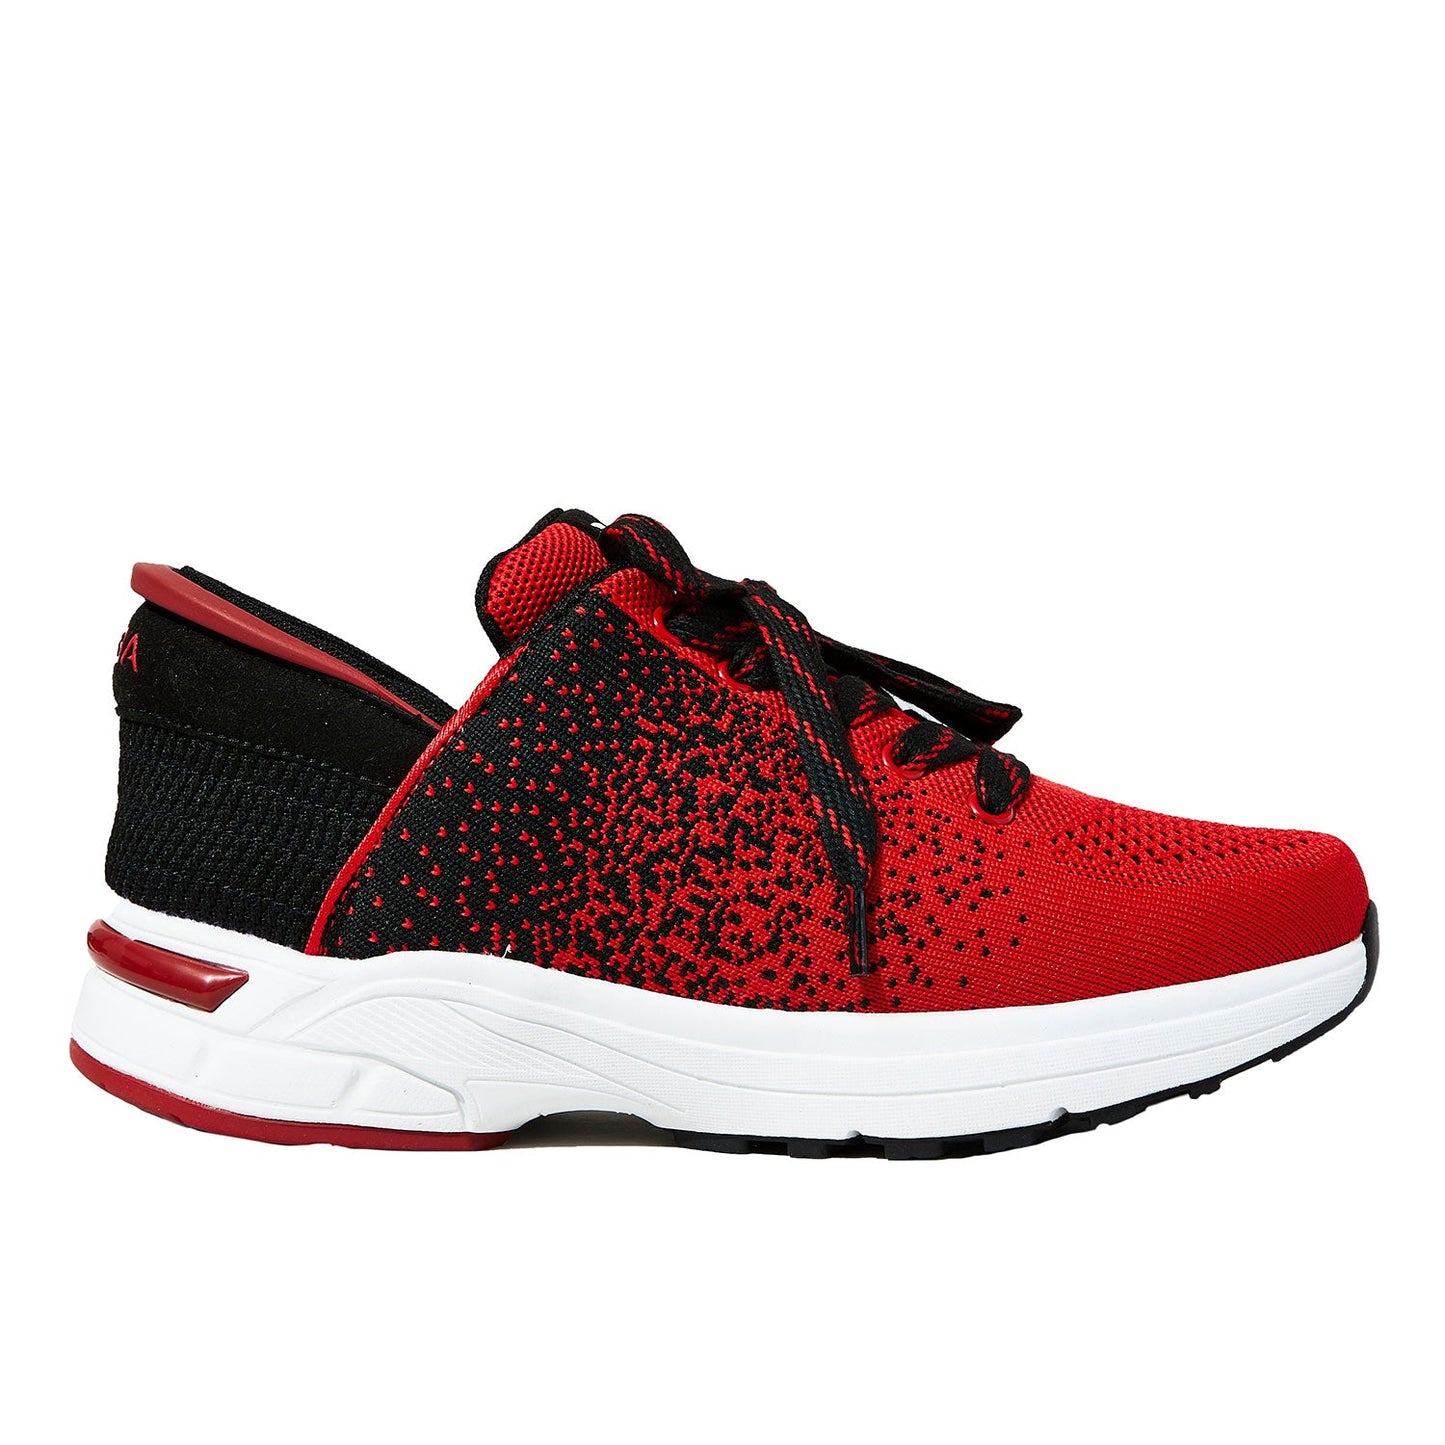 Men's Cherry Red (Medium and Extra Wide Available) (Sizes 7-16)